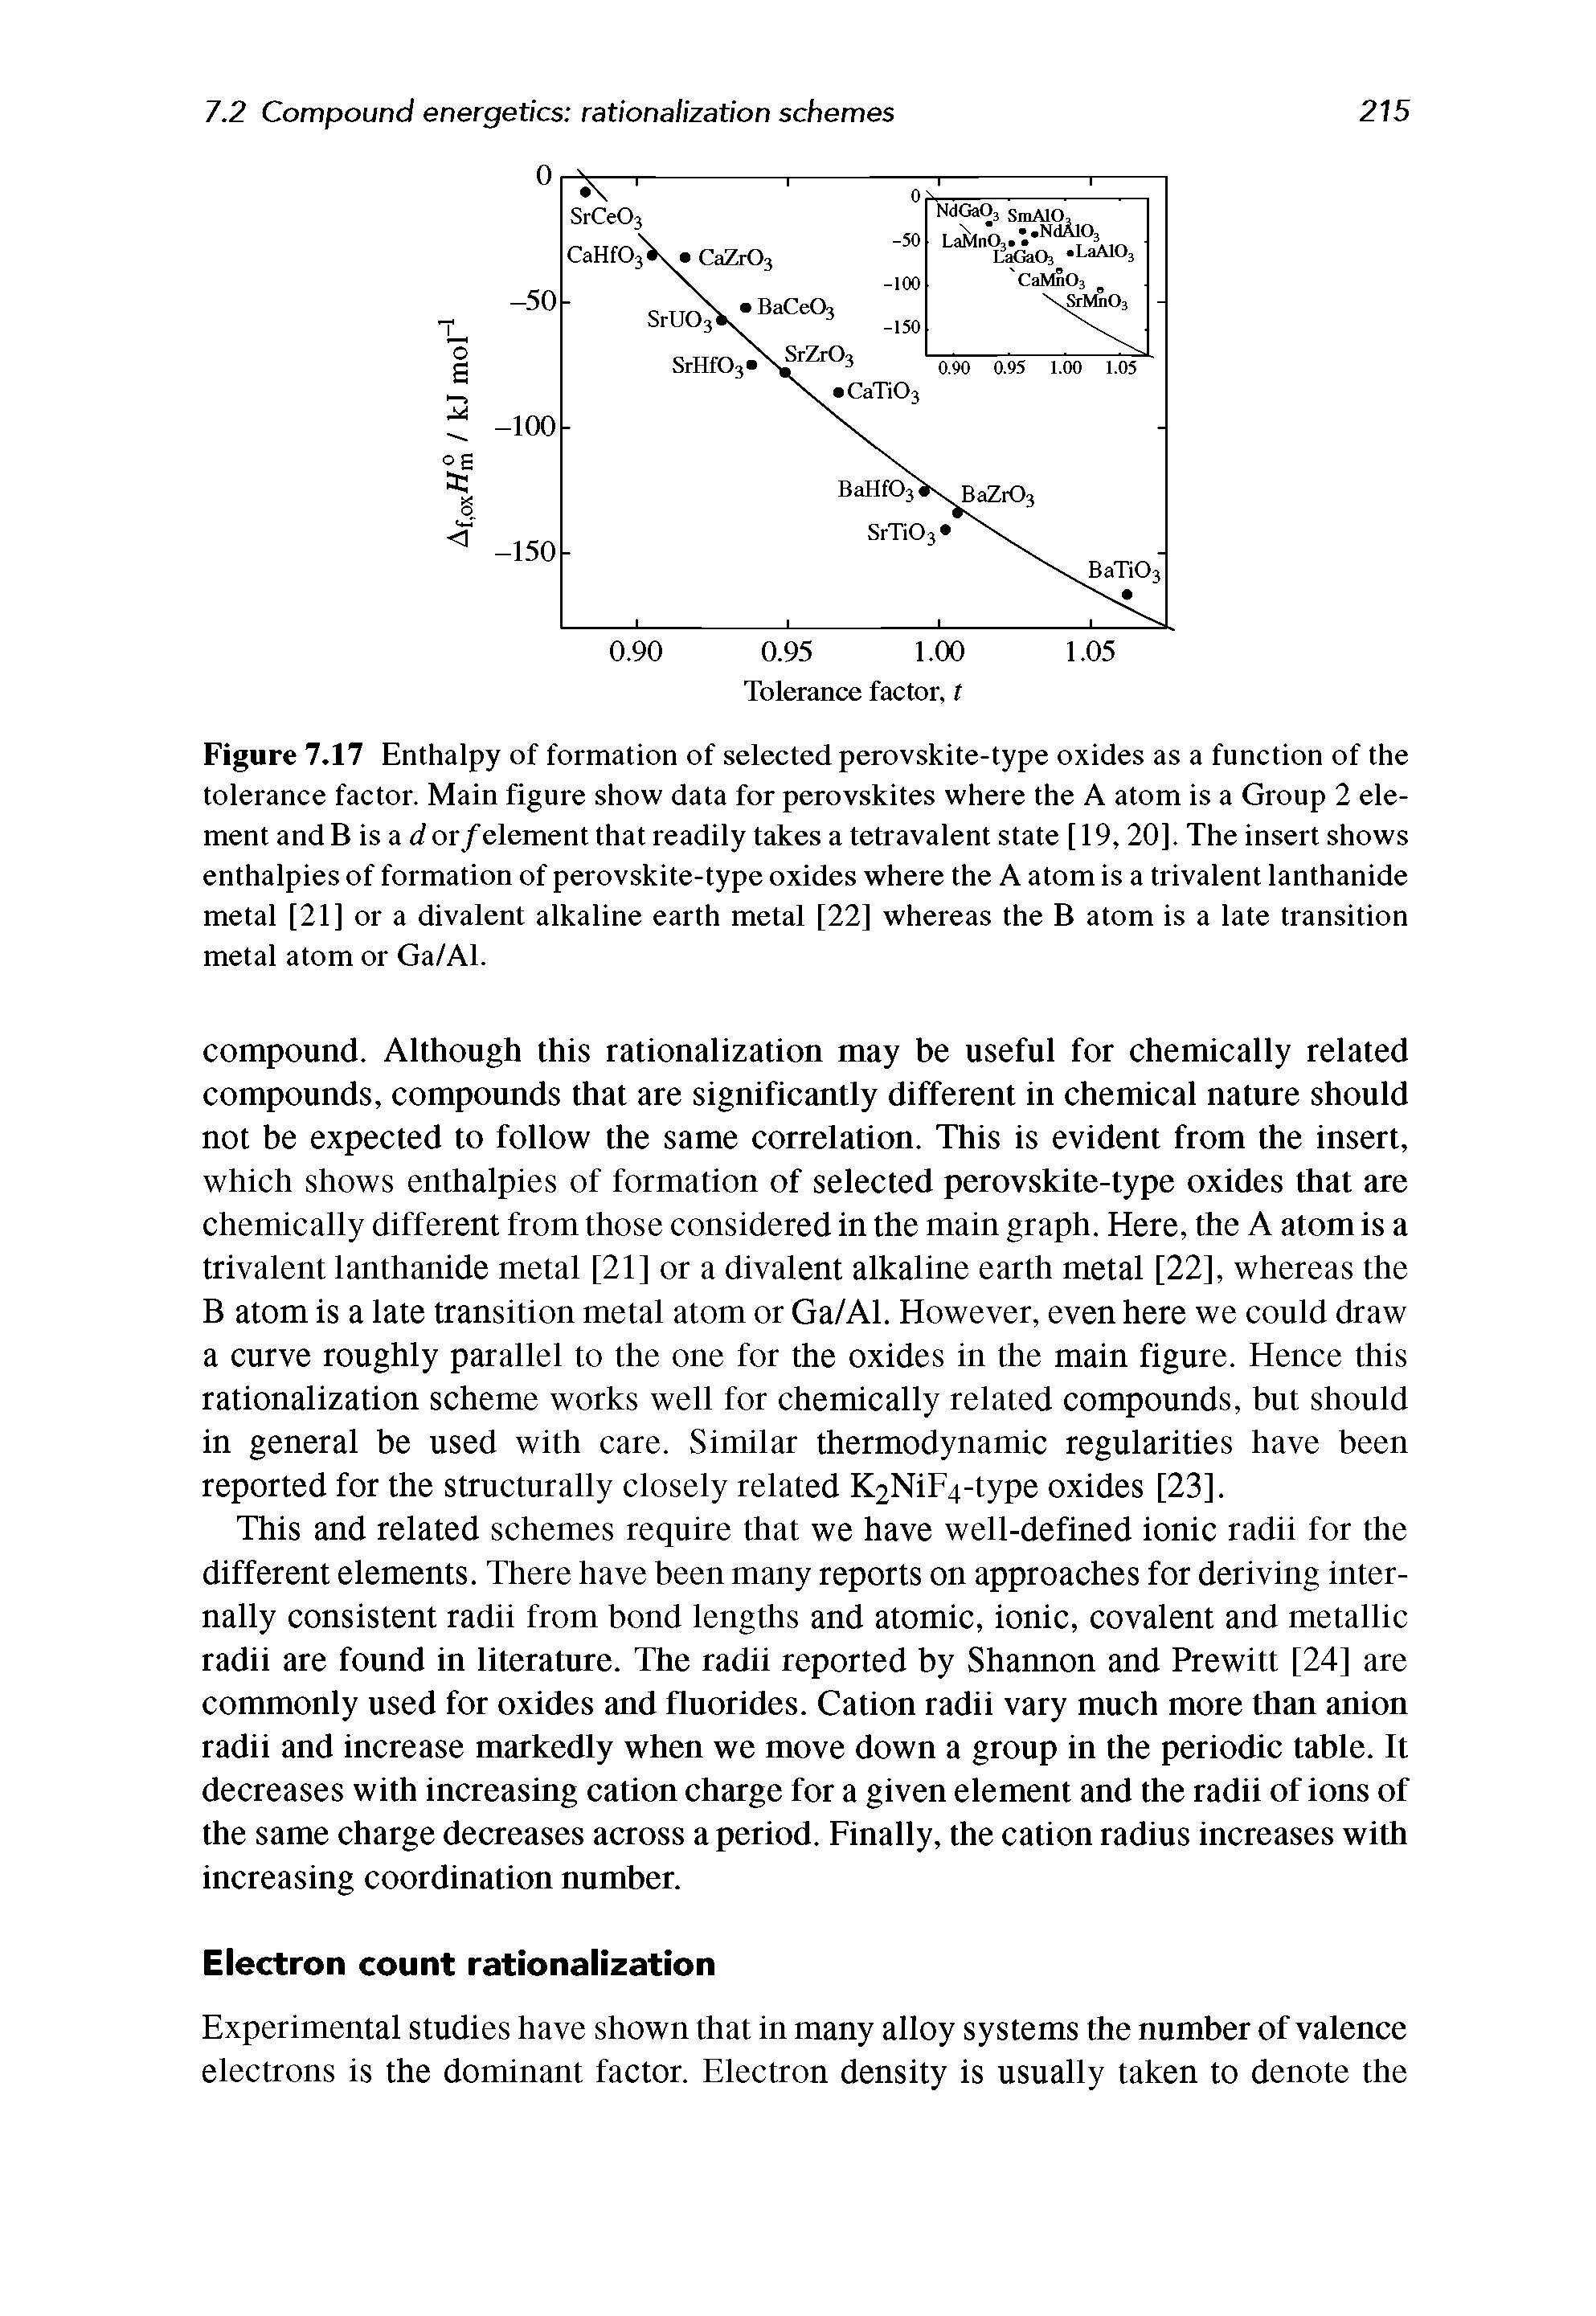 Figure 7.17 Enthalpy of formation of selected perovskite-type oxides as a function of the tolerance factor. Main figure show data for perovskites where the A atom is a Group 2 element and B is a d or/element that readily takes a tetravalent state [19,20]. The insert shows enthalpies of formation of perovskite-type oxides where the A atom is a trivalent lanthanide metal [21] or a divalent alkaline earth metal [22] whereas the B atom is a late transition metal atom or Ga/Al.